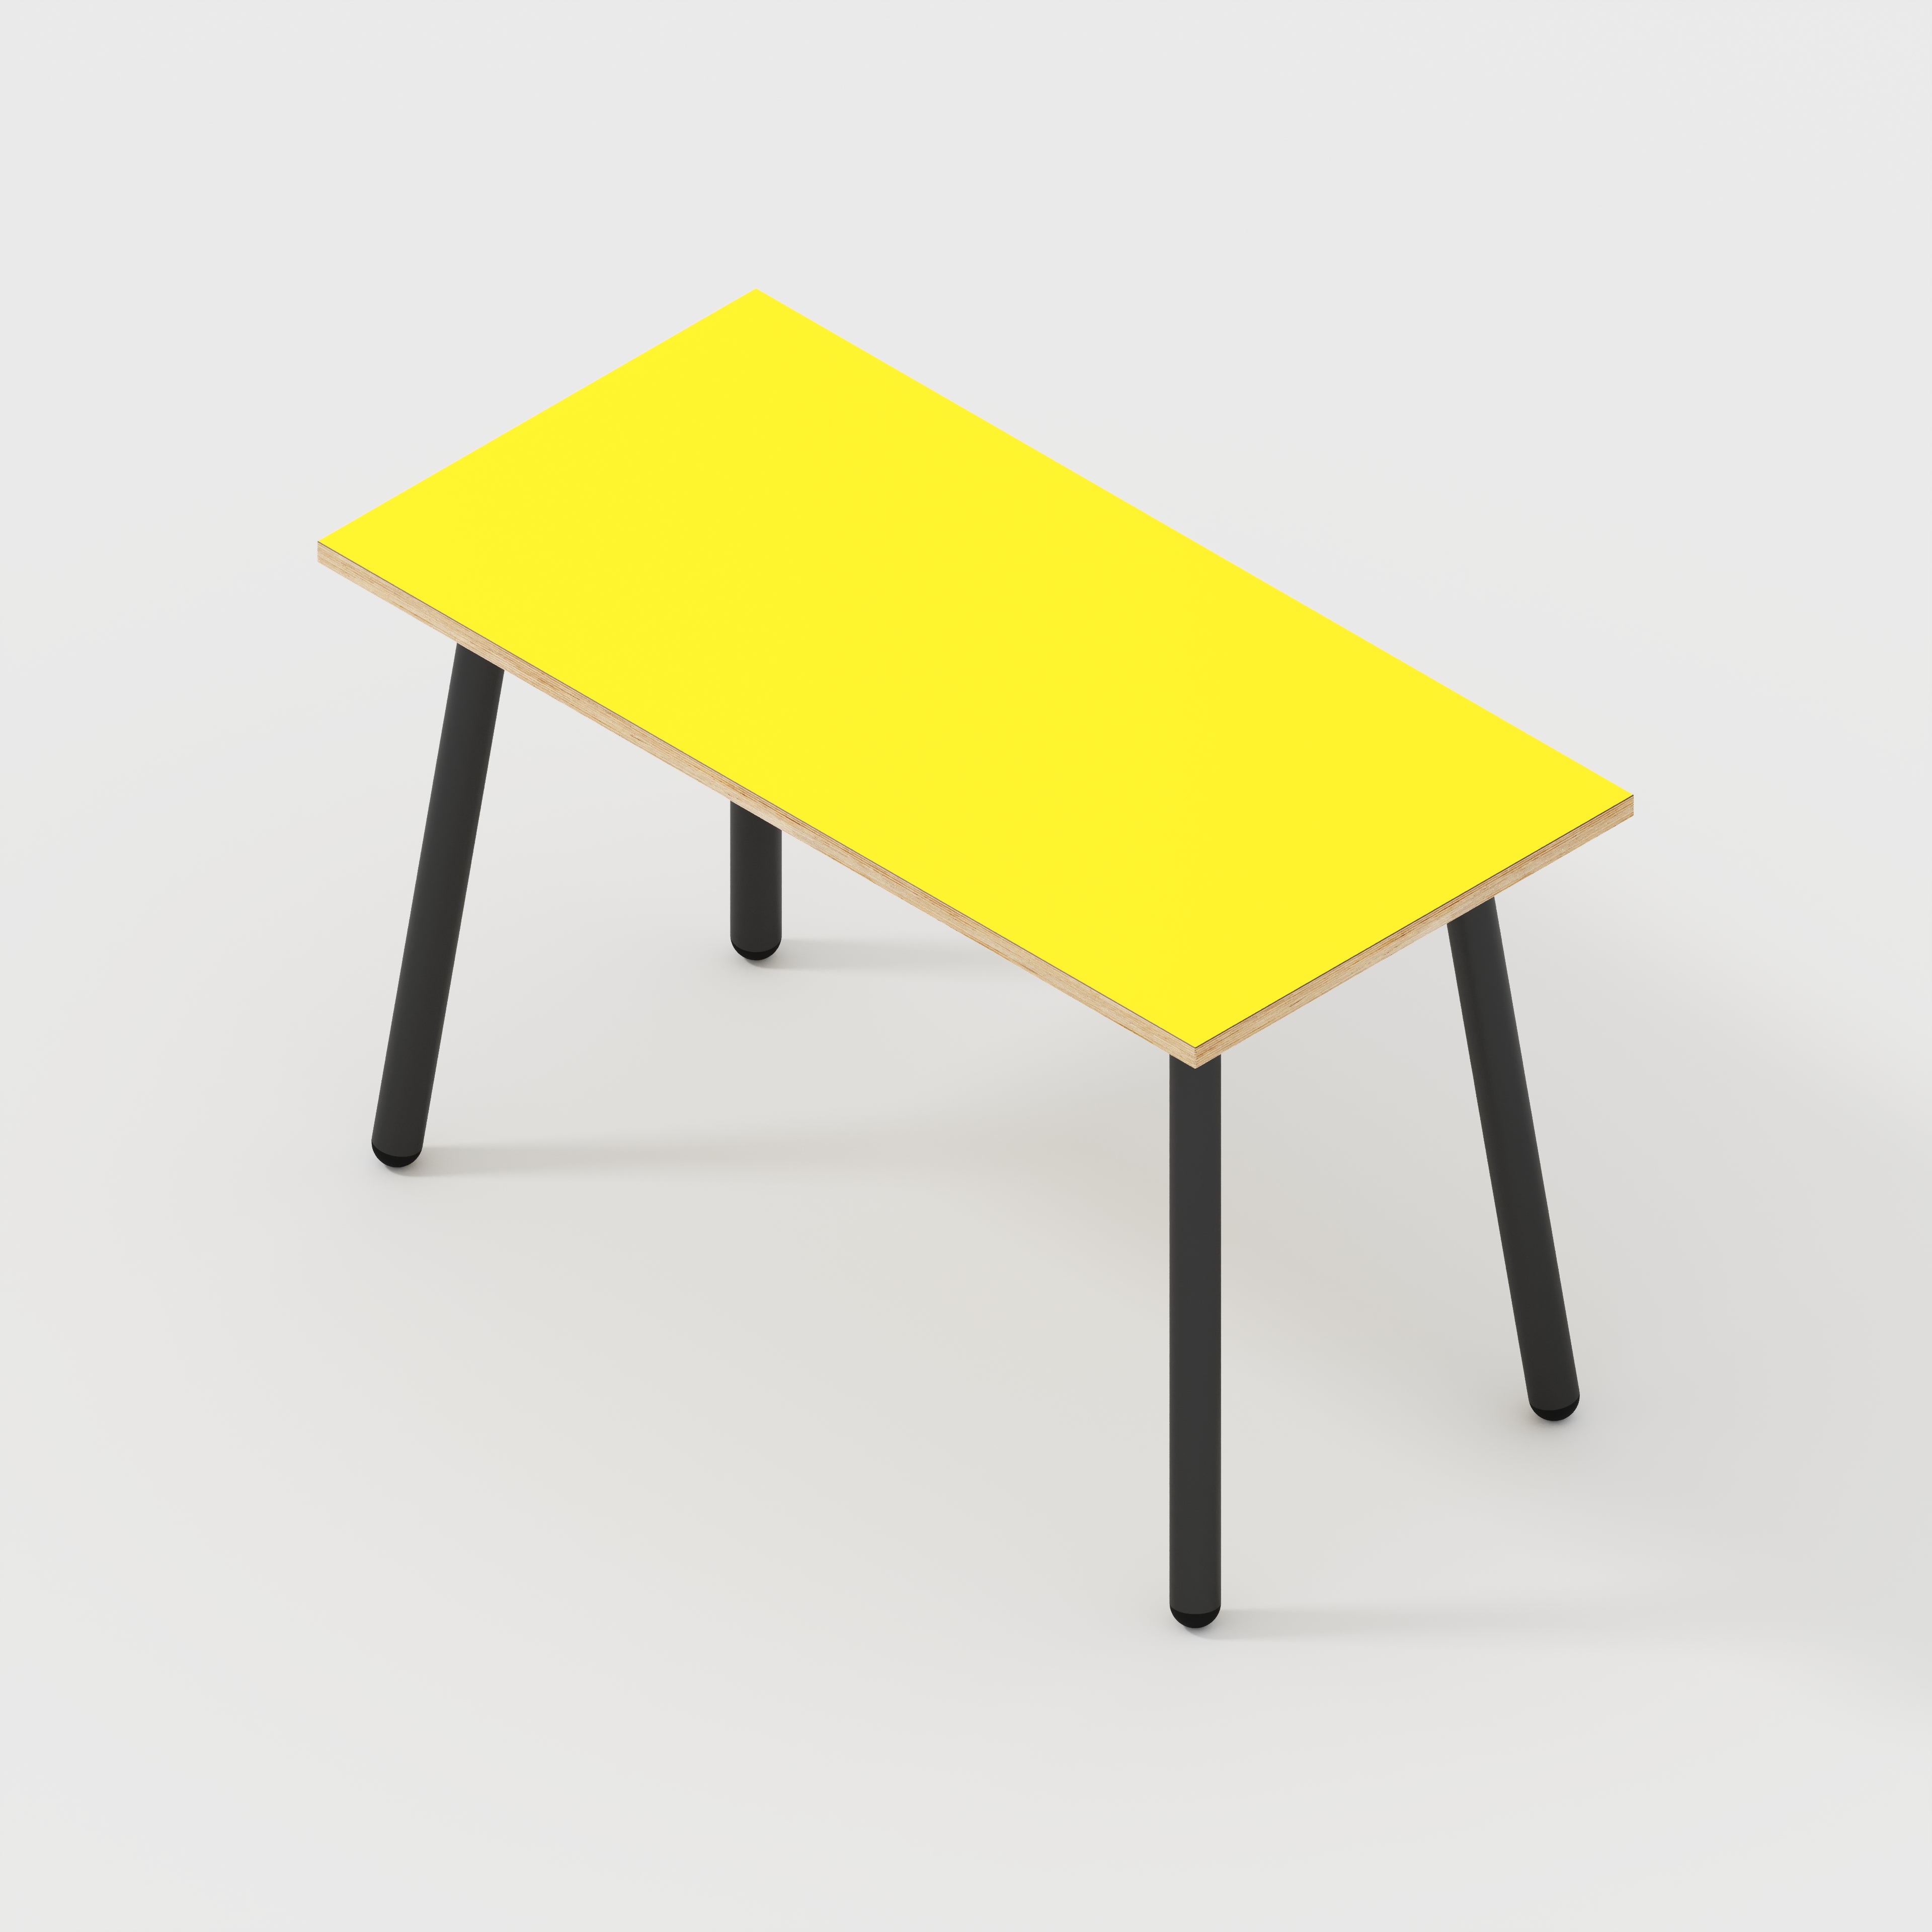 Desk with Black Round Single Pin Legs - Formica Chrome Yellow - 1200(w) x 600(d) x 735(h)